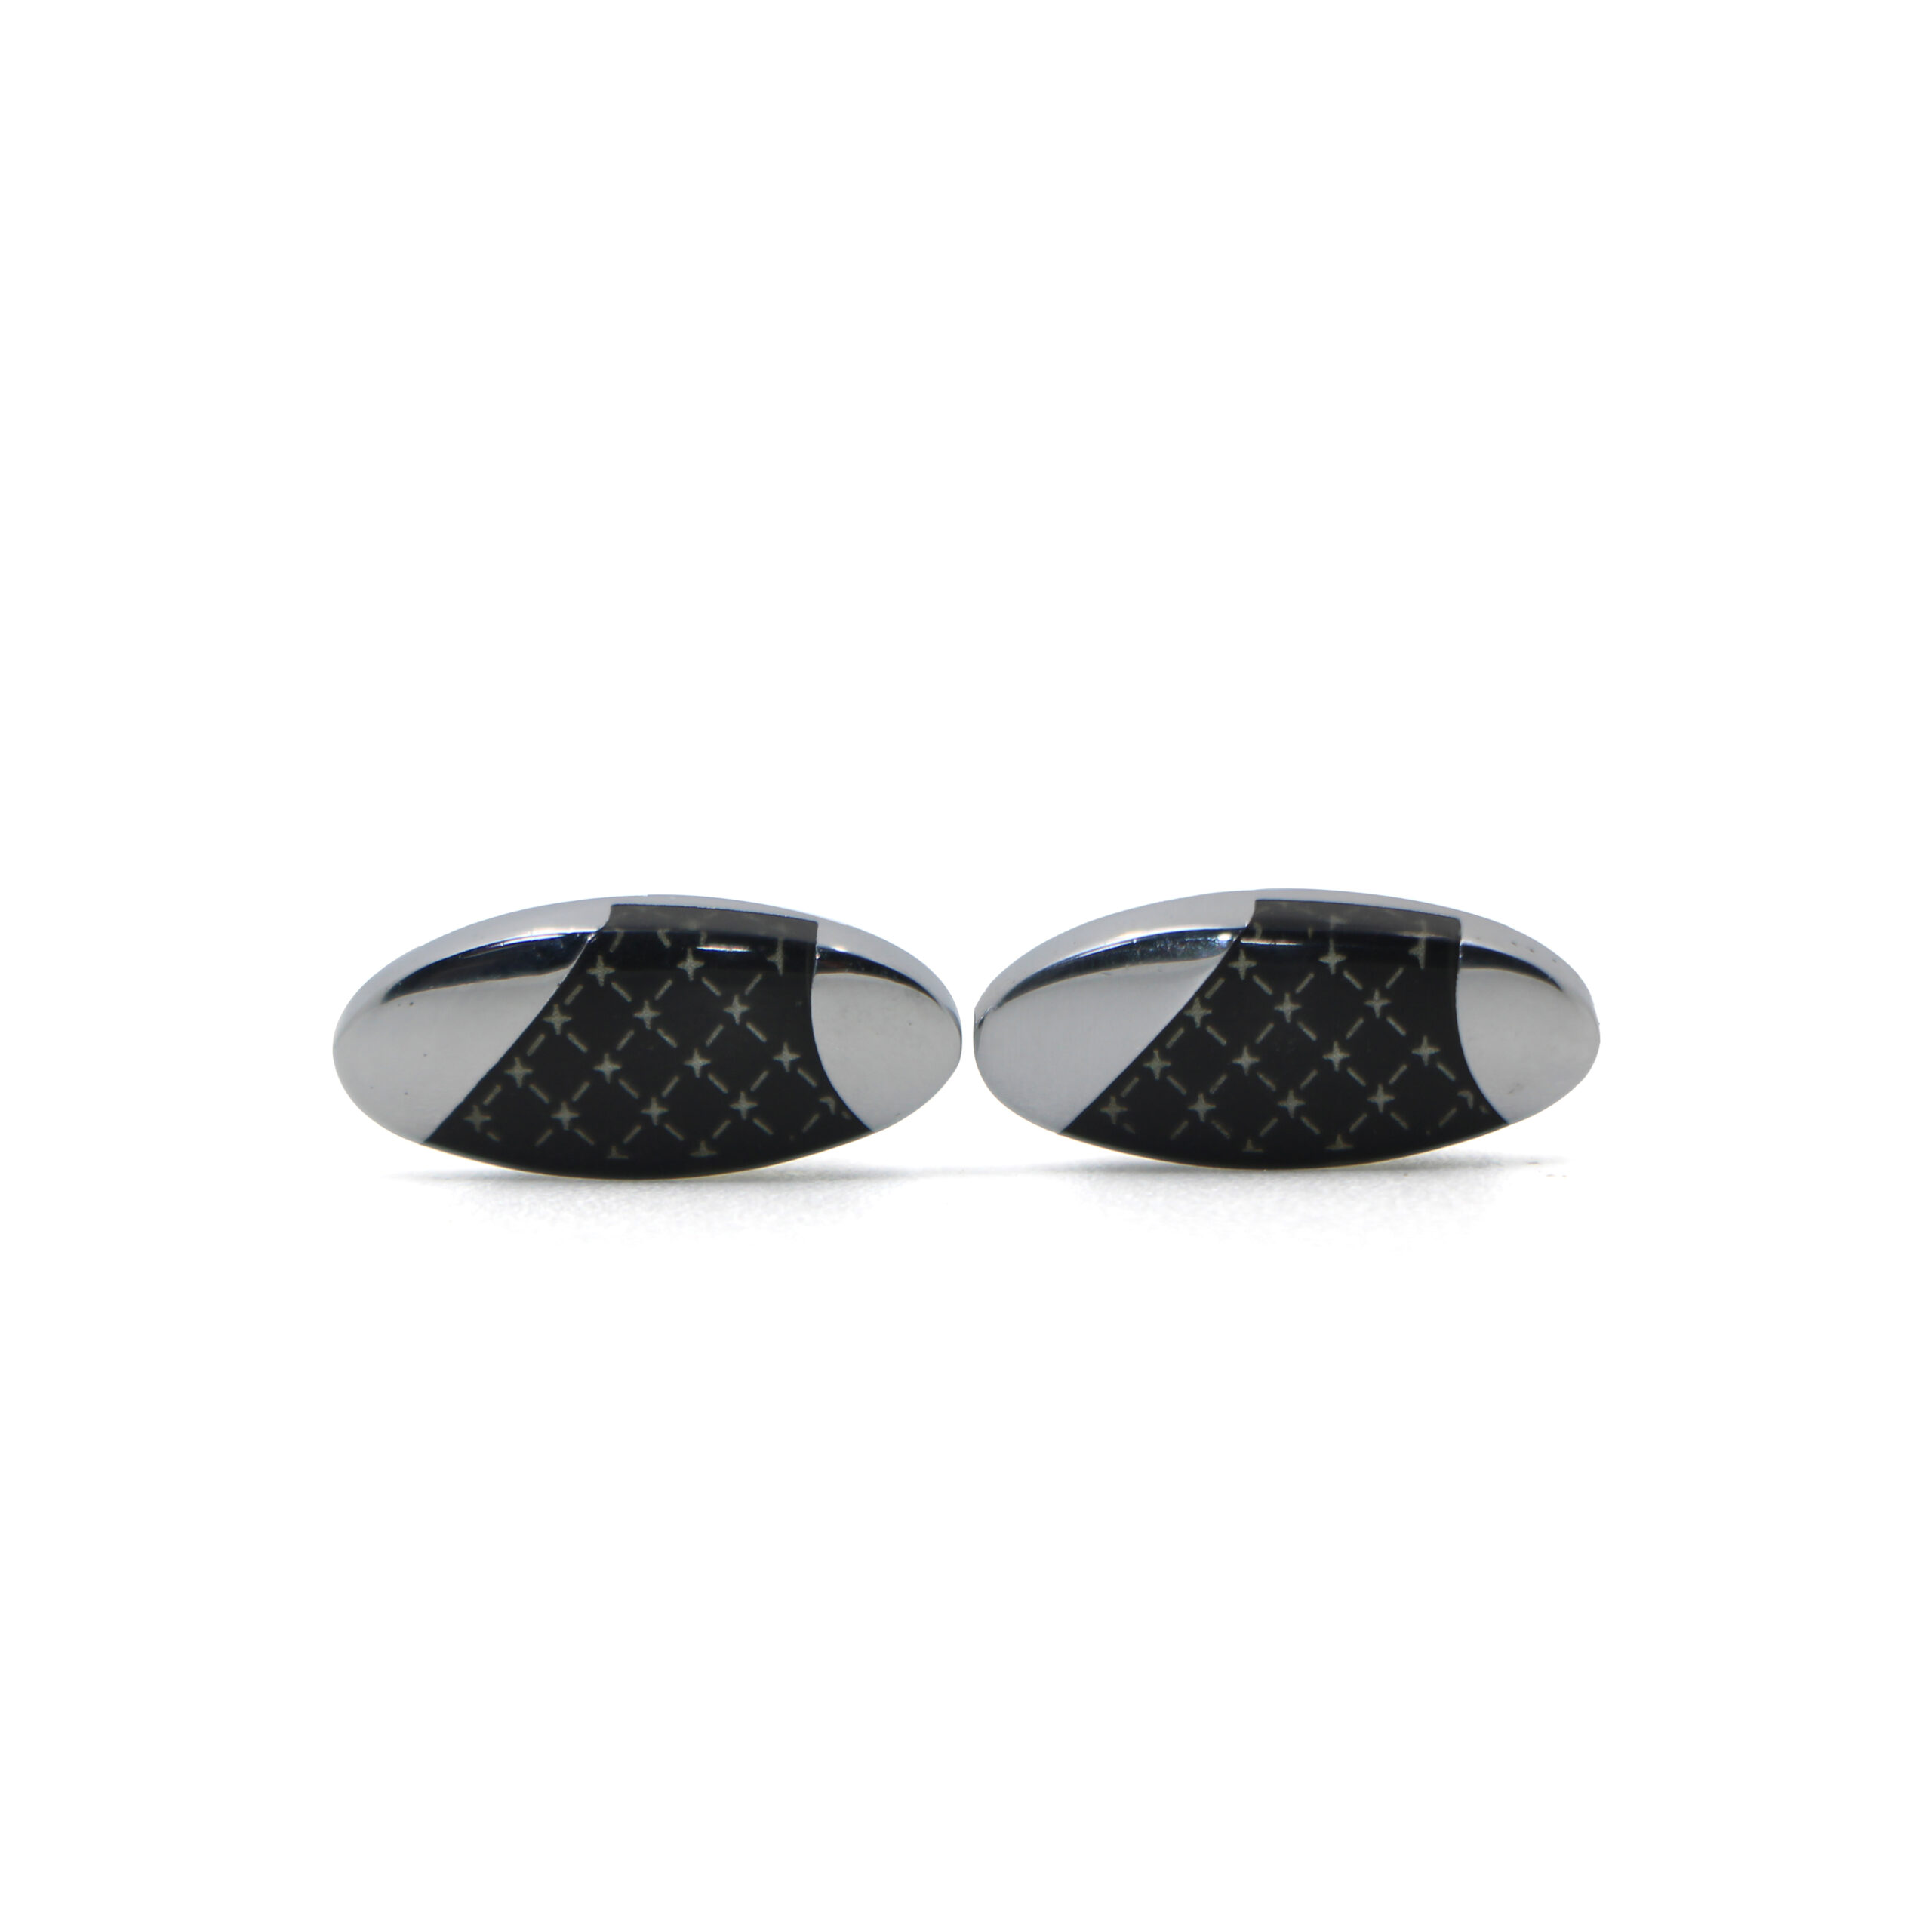 Cufflers Vintage Cufflinks for Men’s Shirt with a Gift Box – CU-1019